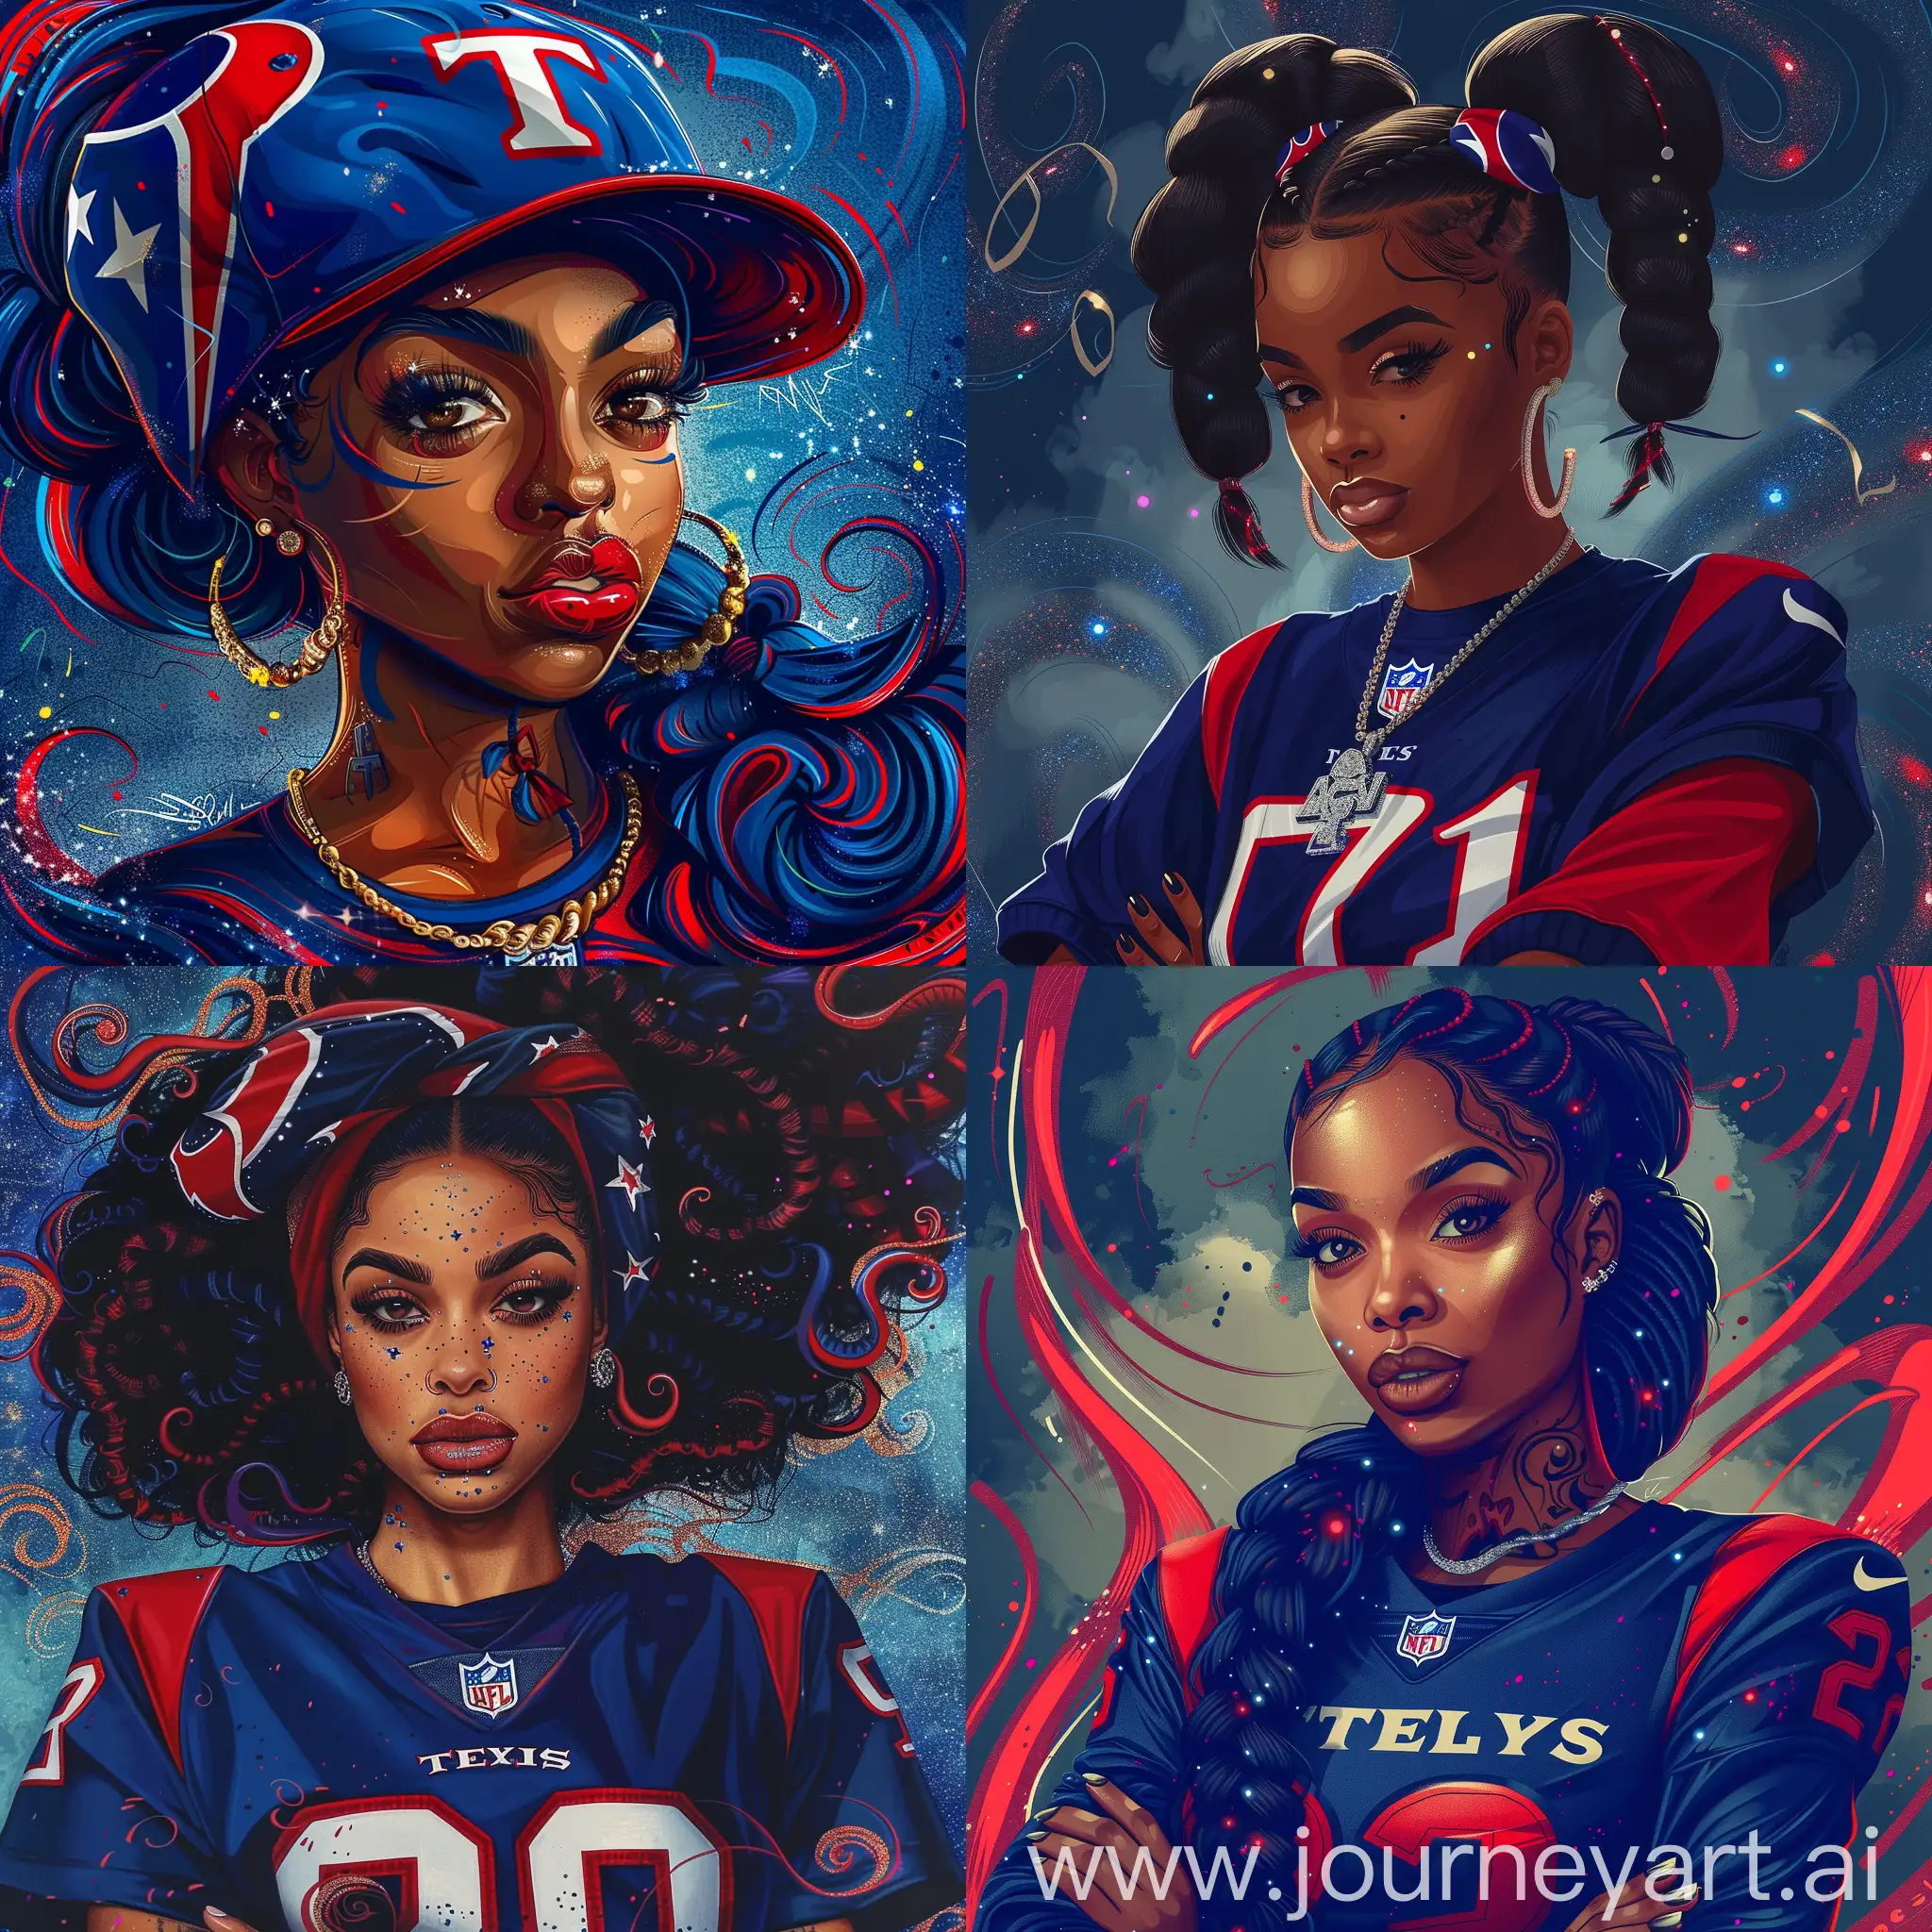 Realism art for the Hip-Hop female wearing Houston texans, in the style of hip-hop inspired, royal blue and red, princesscore, punctuated caricature, hip hop aesthetics, azure, asante art, background swirls and glitter